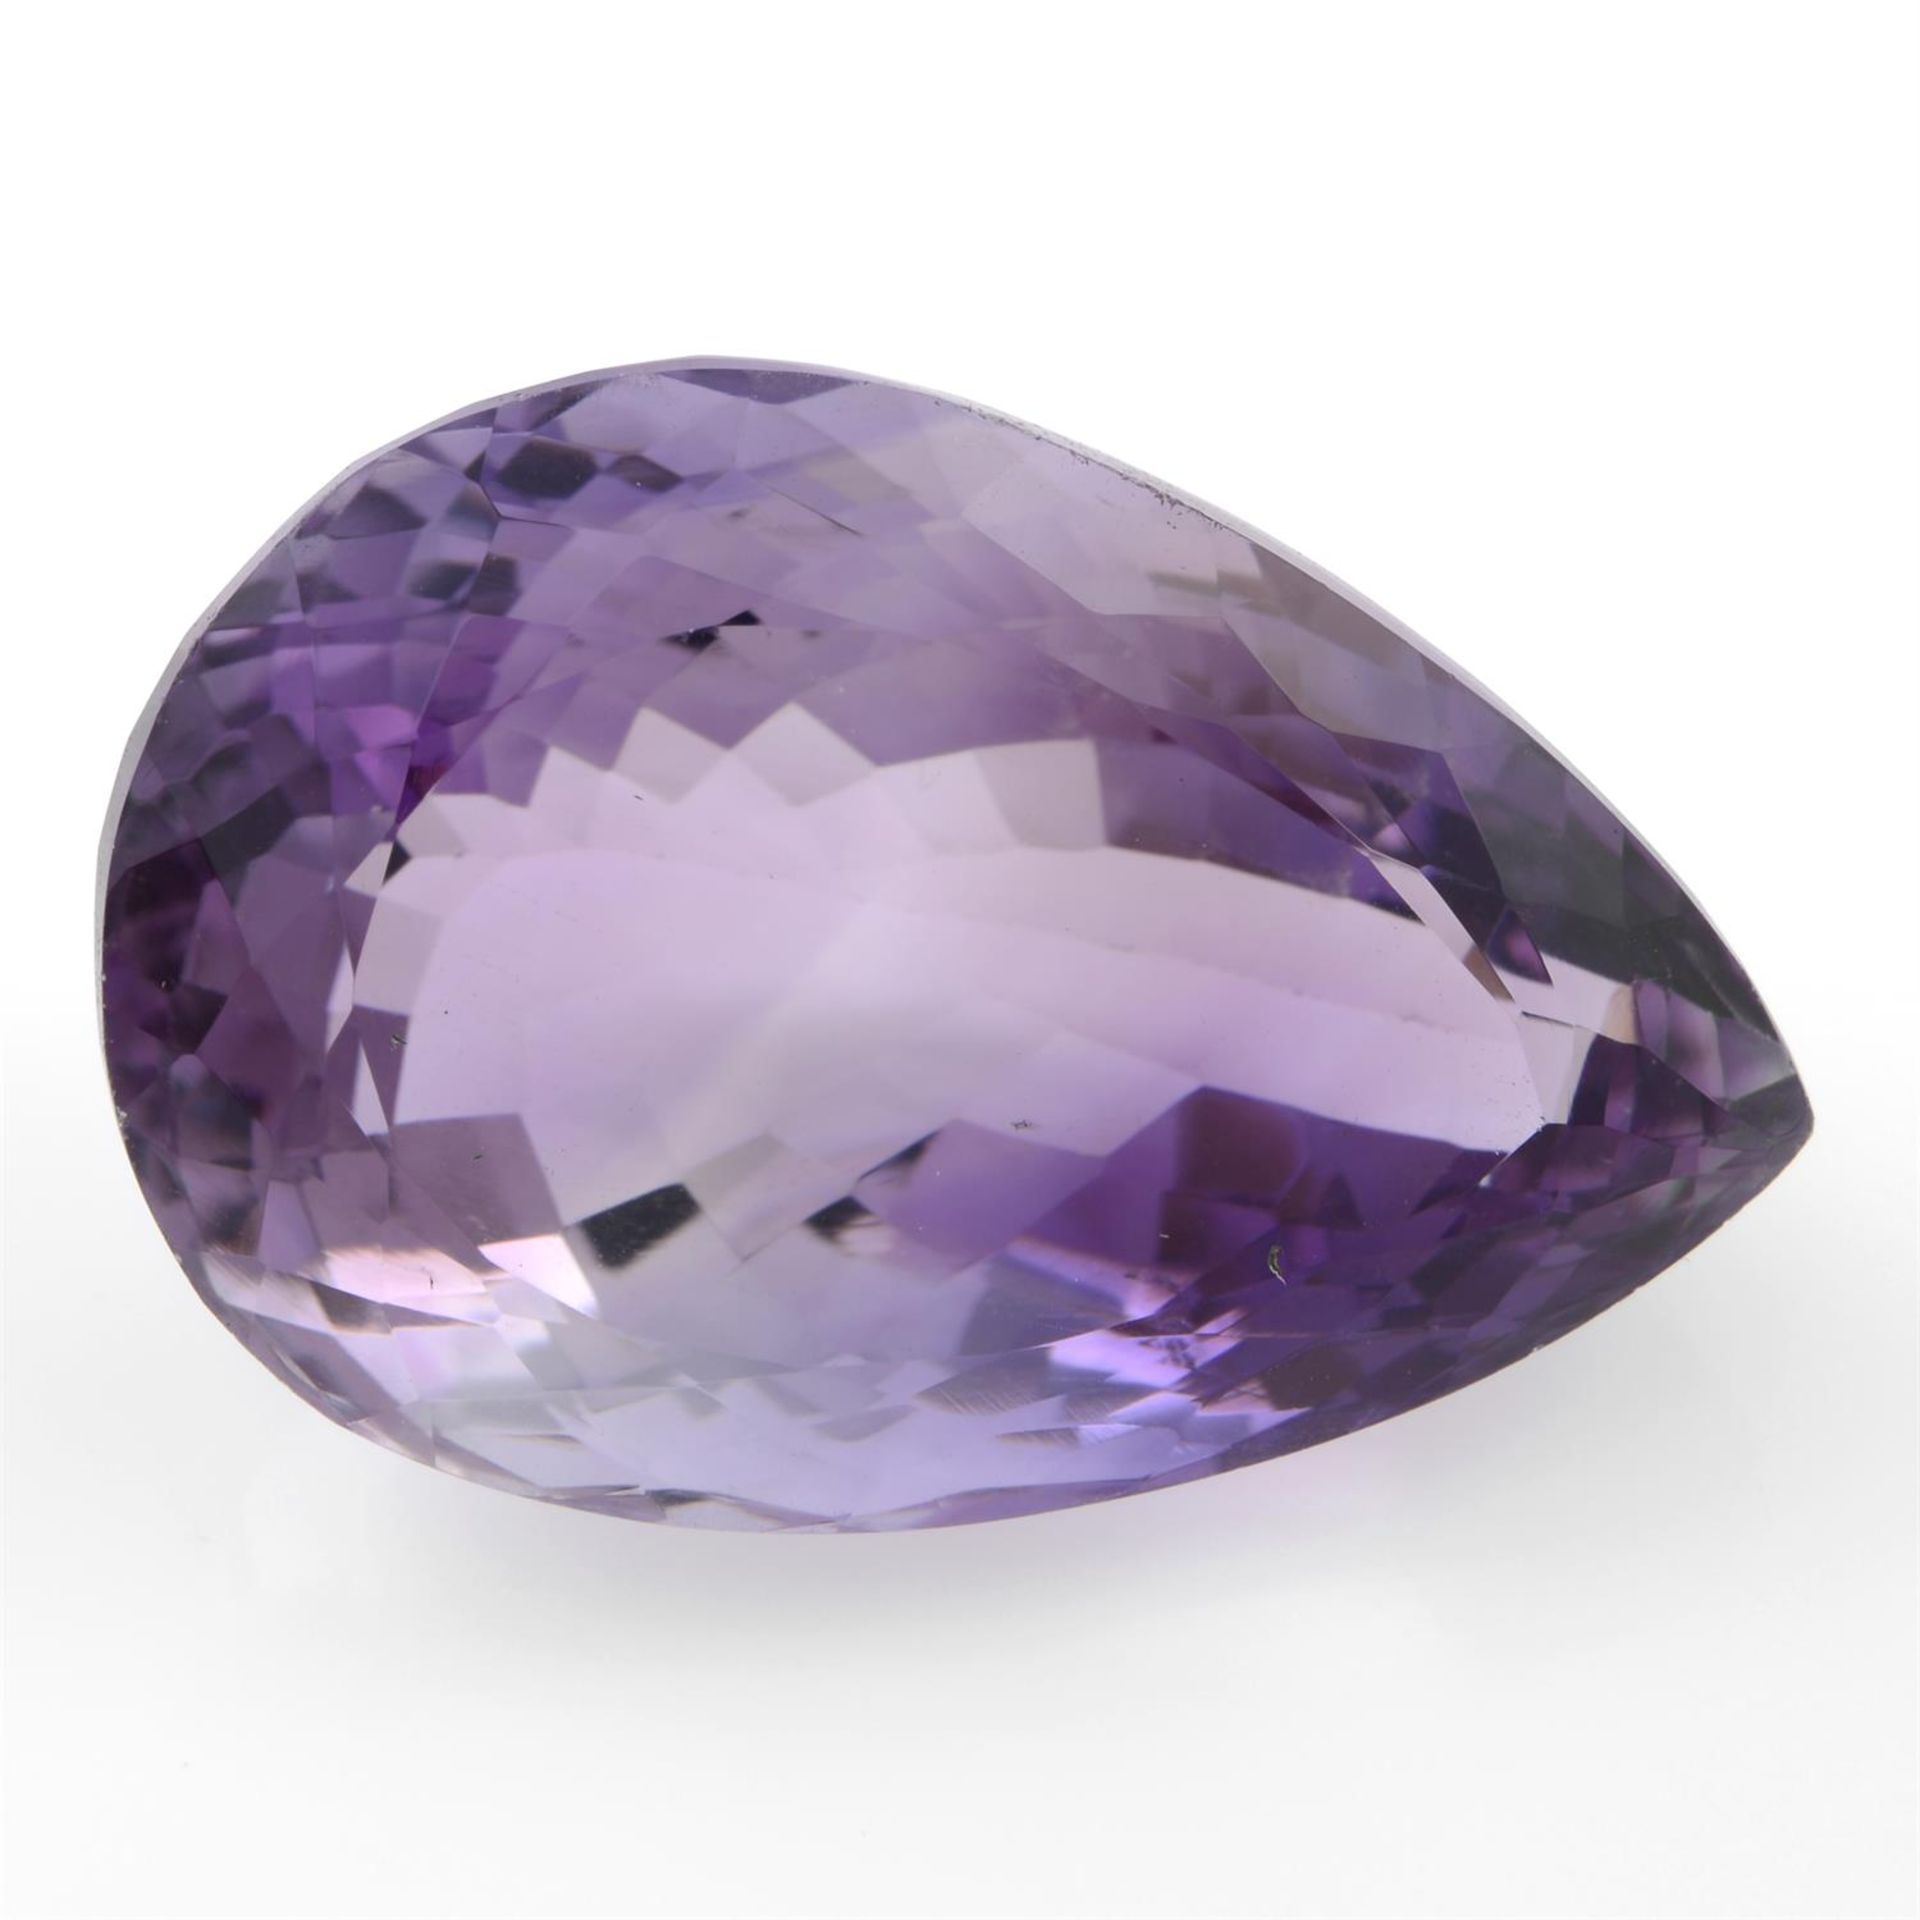 A pear shape amethyst, weighing 35.90ct